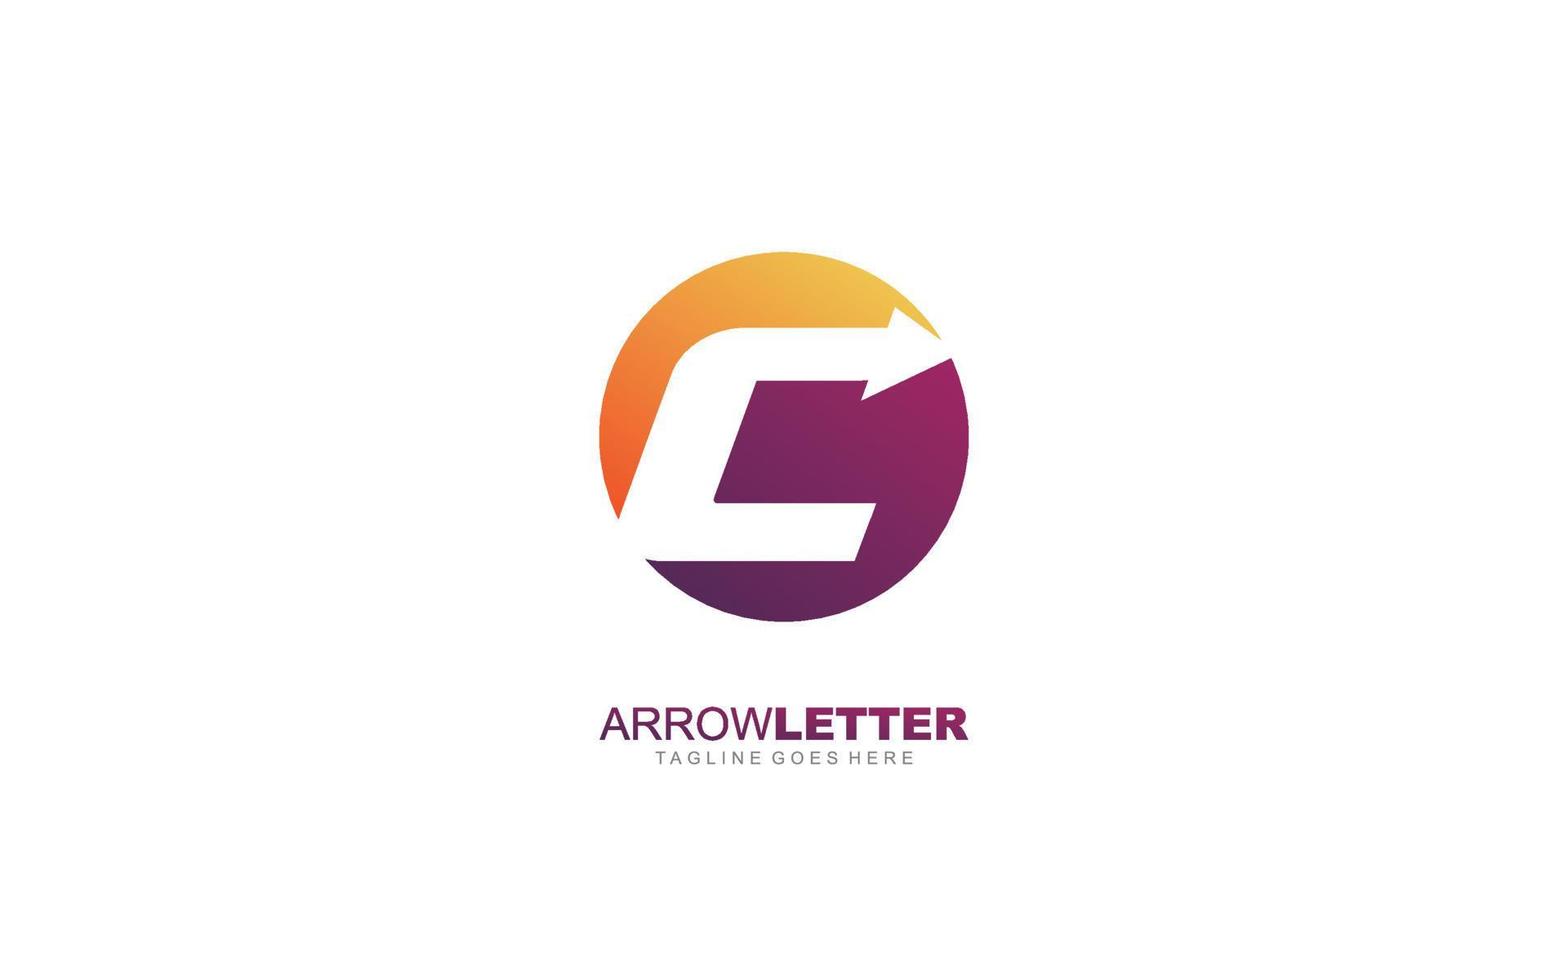 C logo business for branding company. arrow template vector illustration for your brand.